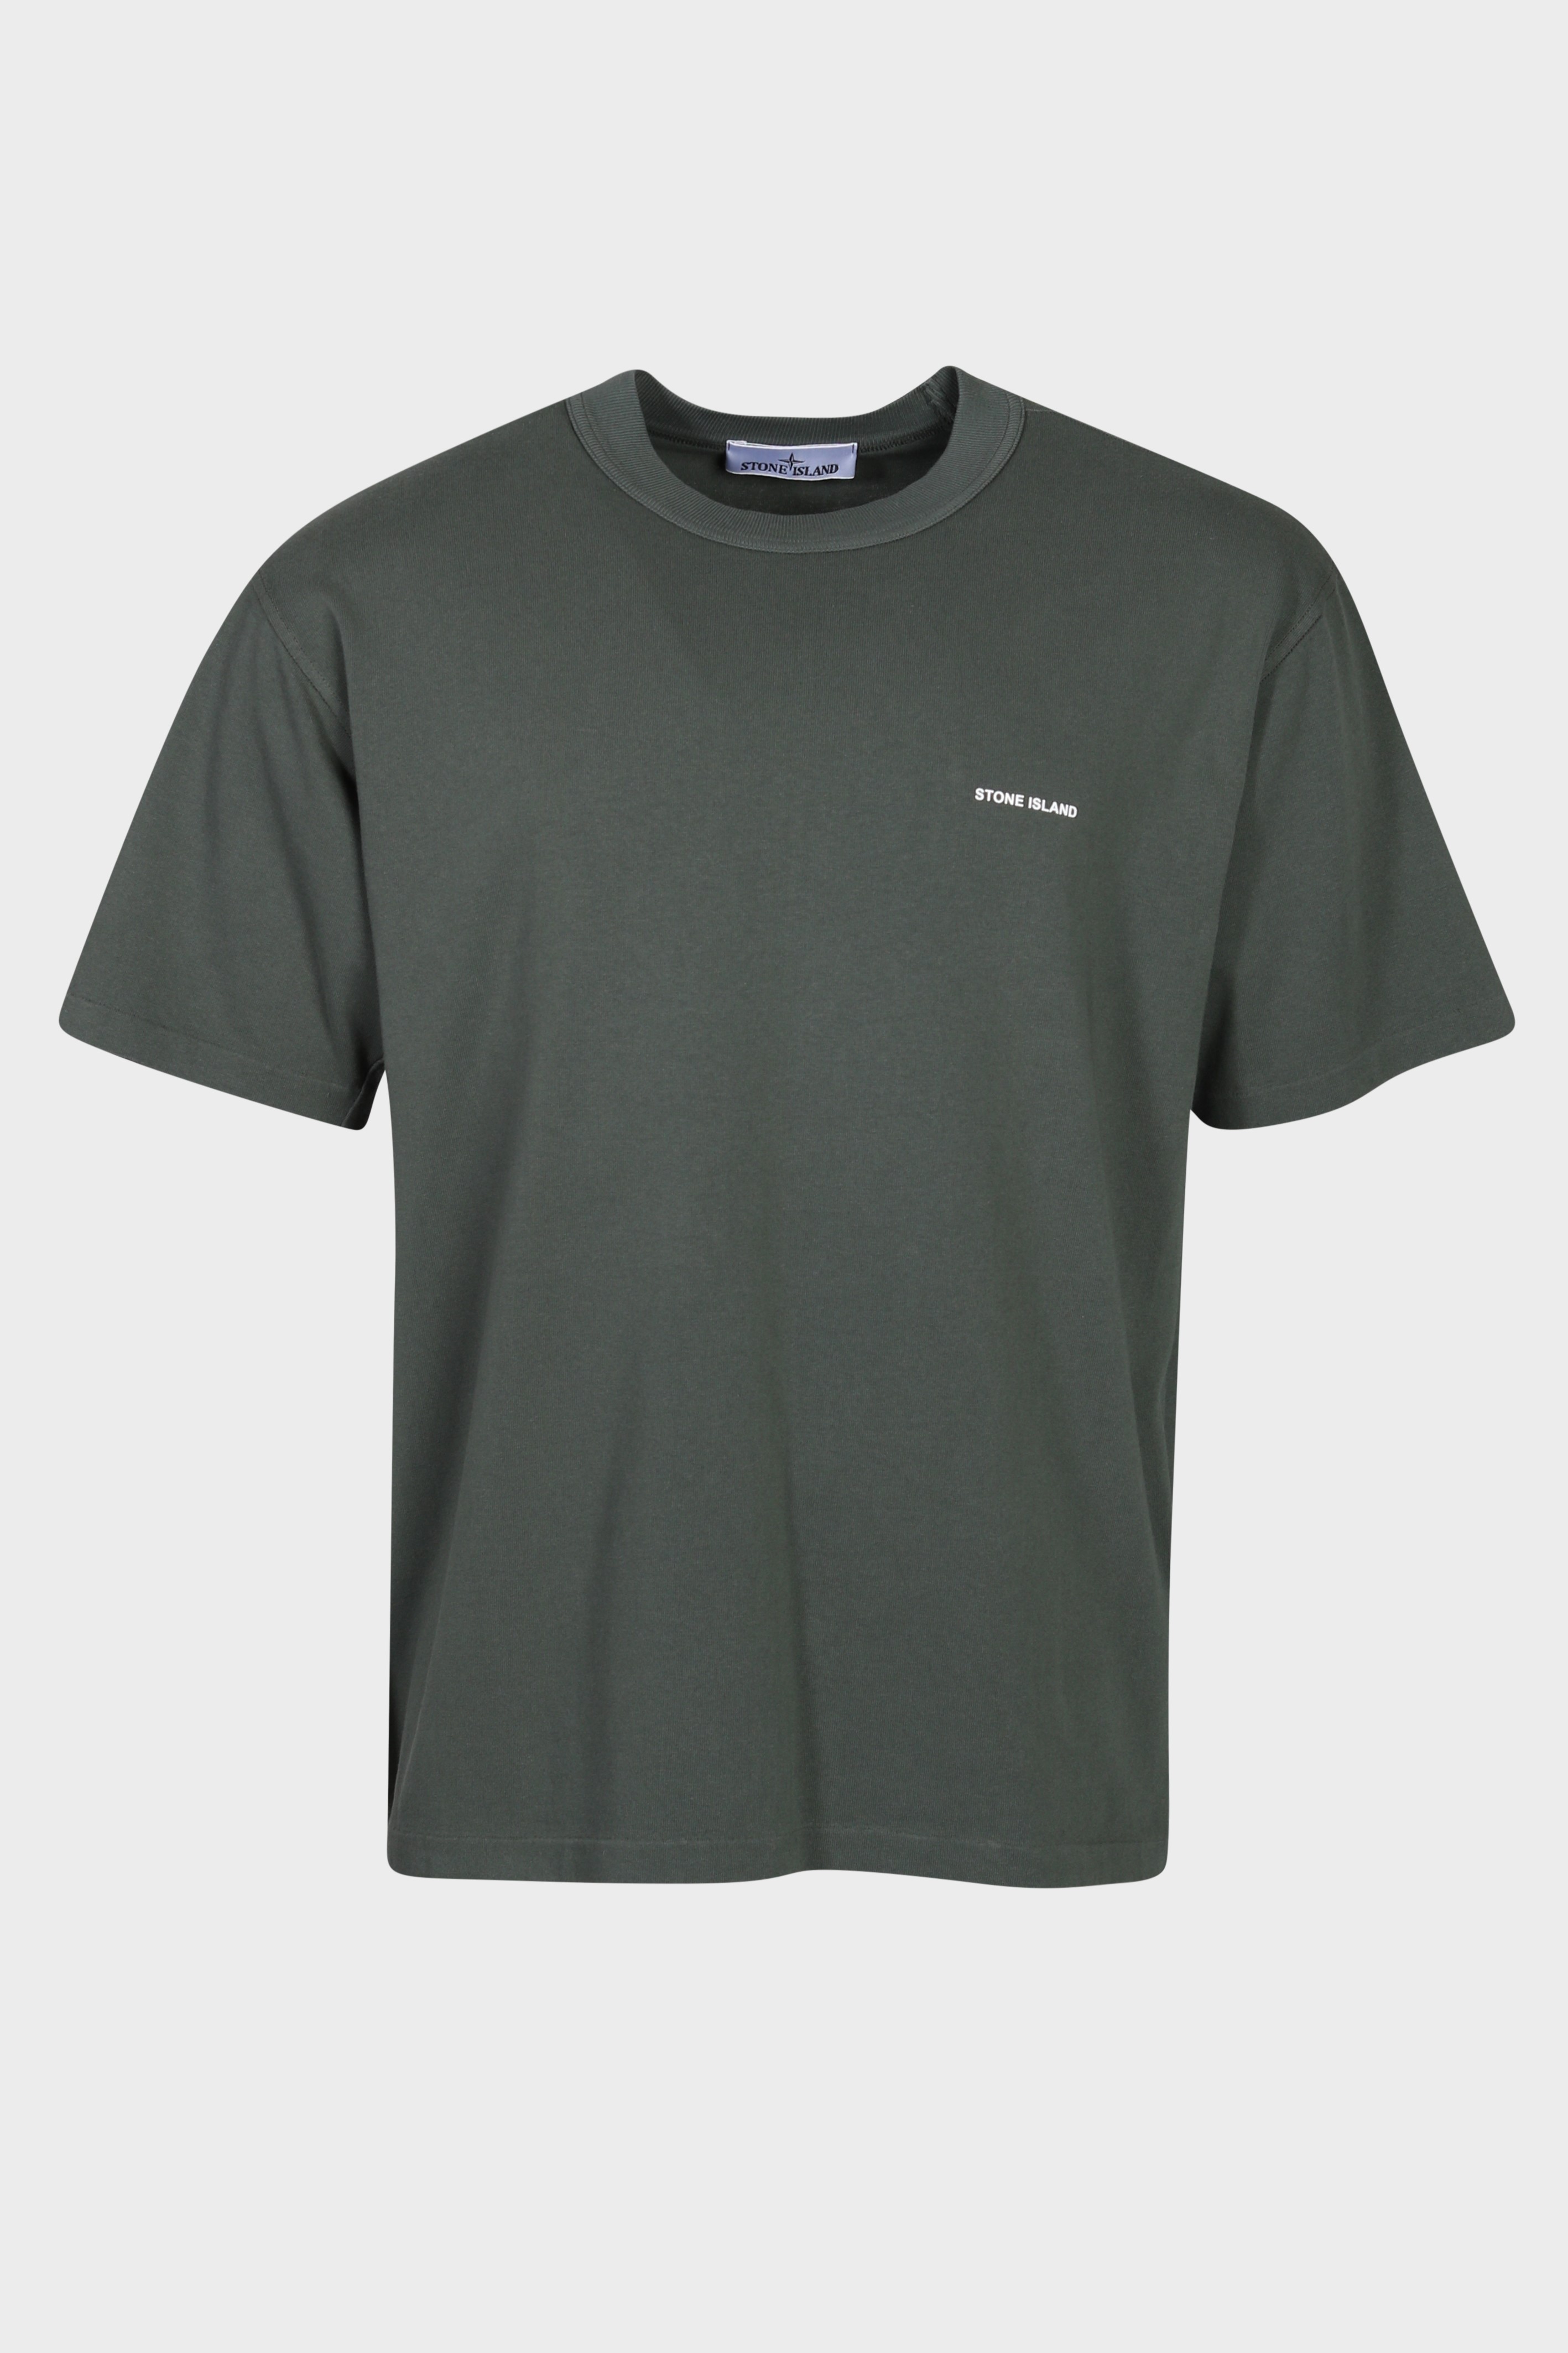 STONE ISLAND Stamp T-Shirt in Green XL